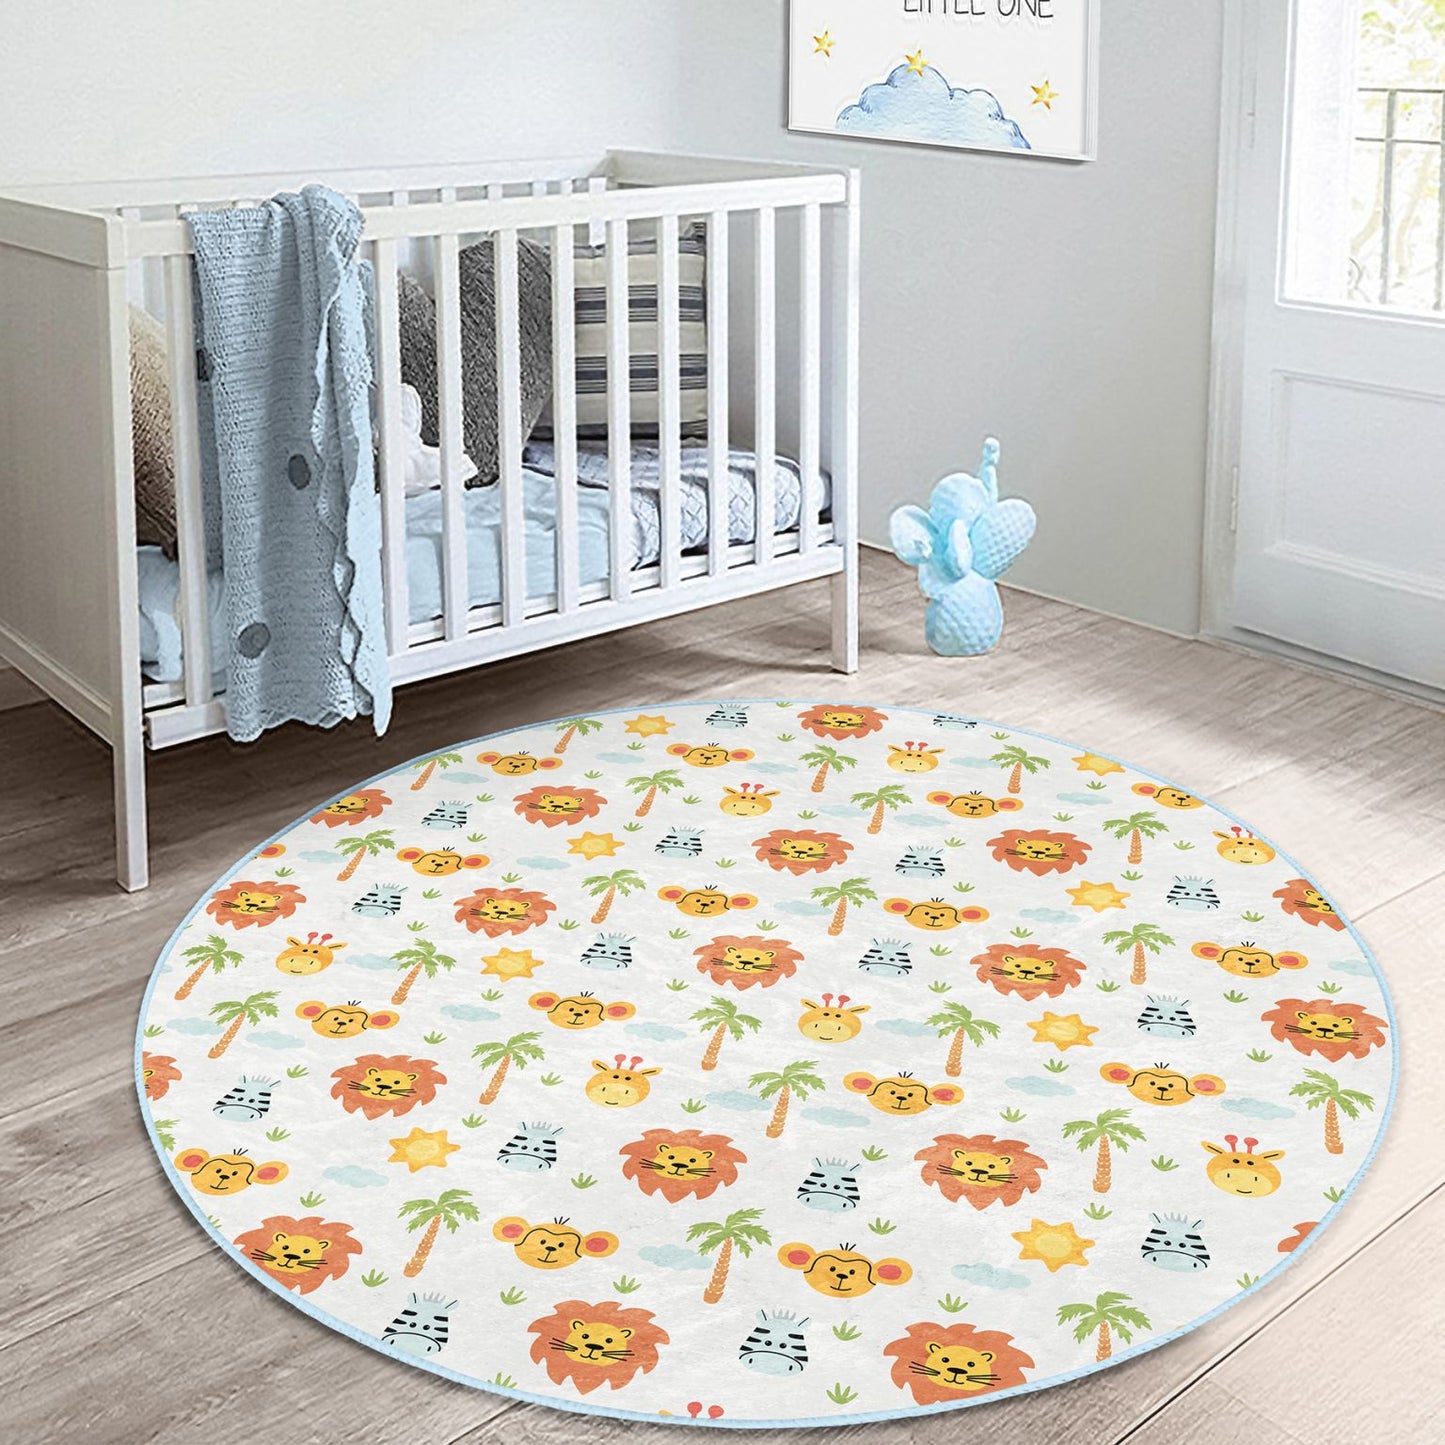 Adorable Animal Friends-themed Children's Rug